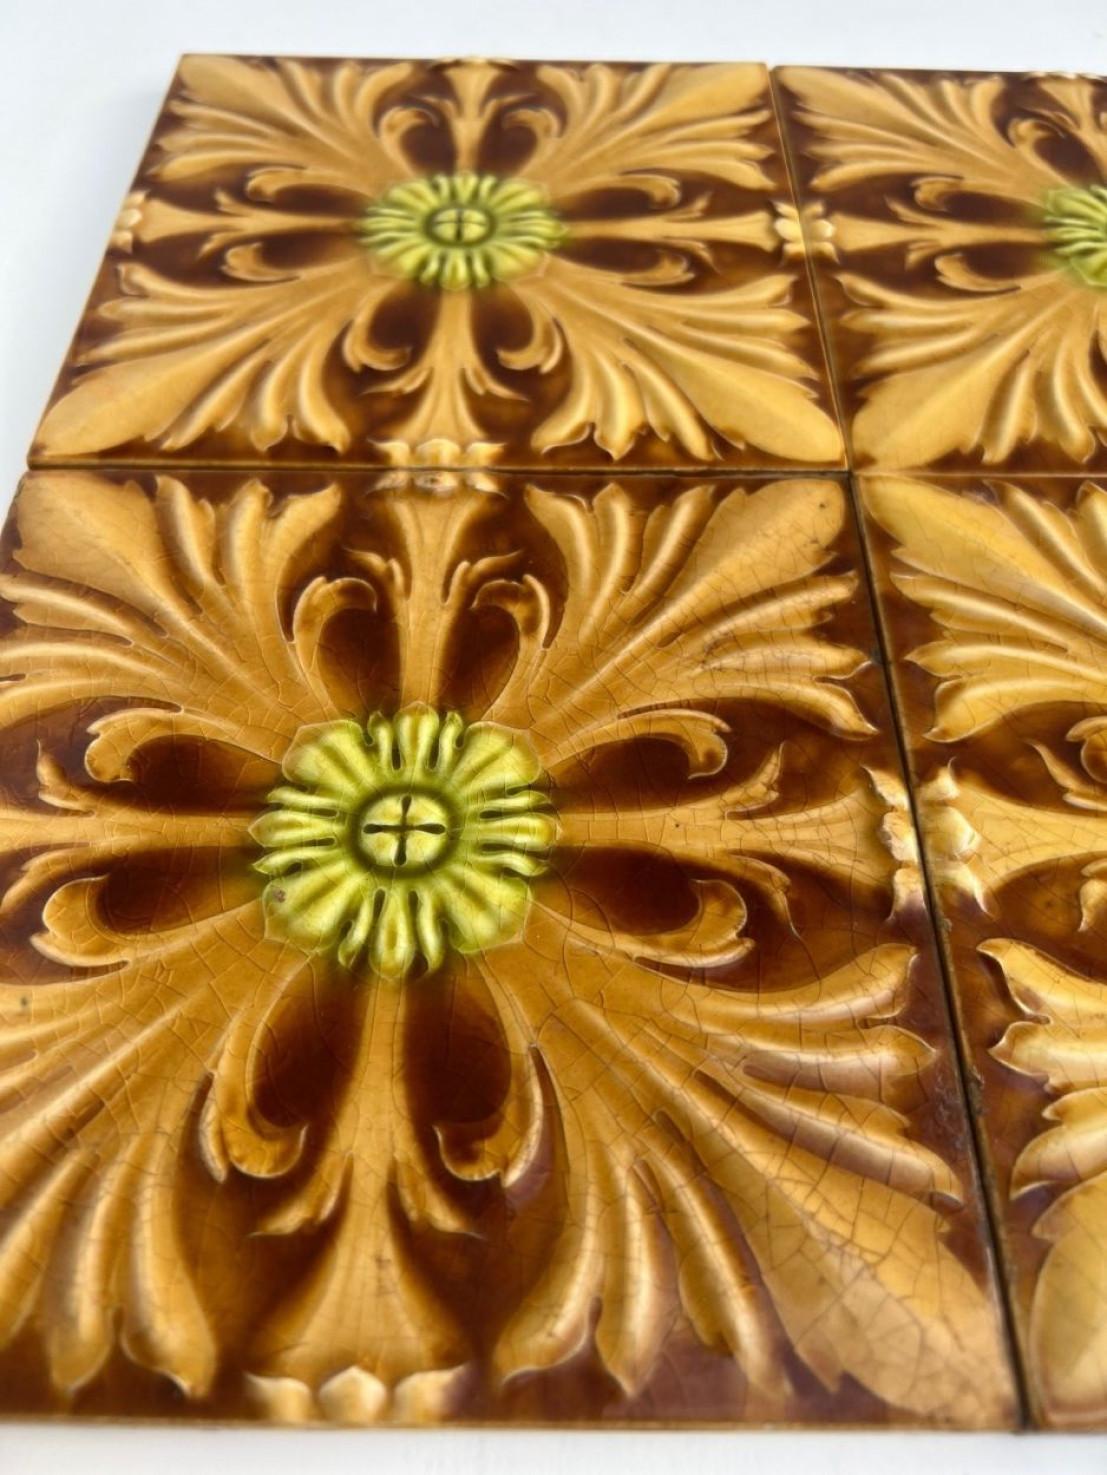 Mixed handmade tiles in rich brown, green and yellow glazed colors. Manufactured around 1920 by Gilliot Hemiksem, Belgium.
These tiles would be charming displayed on easels, framed or incorporated into a custom tile design.

Please note that the